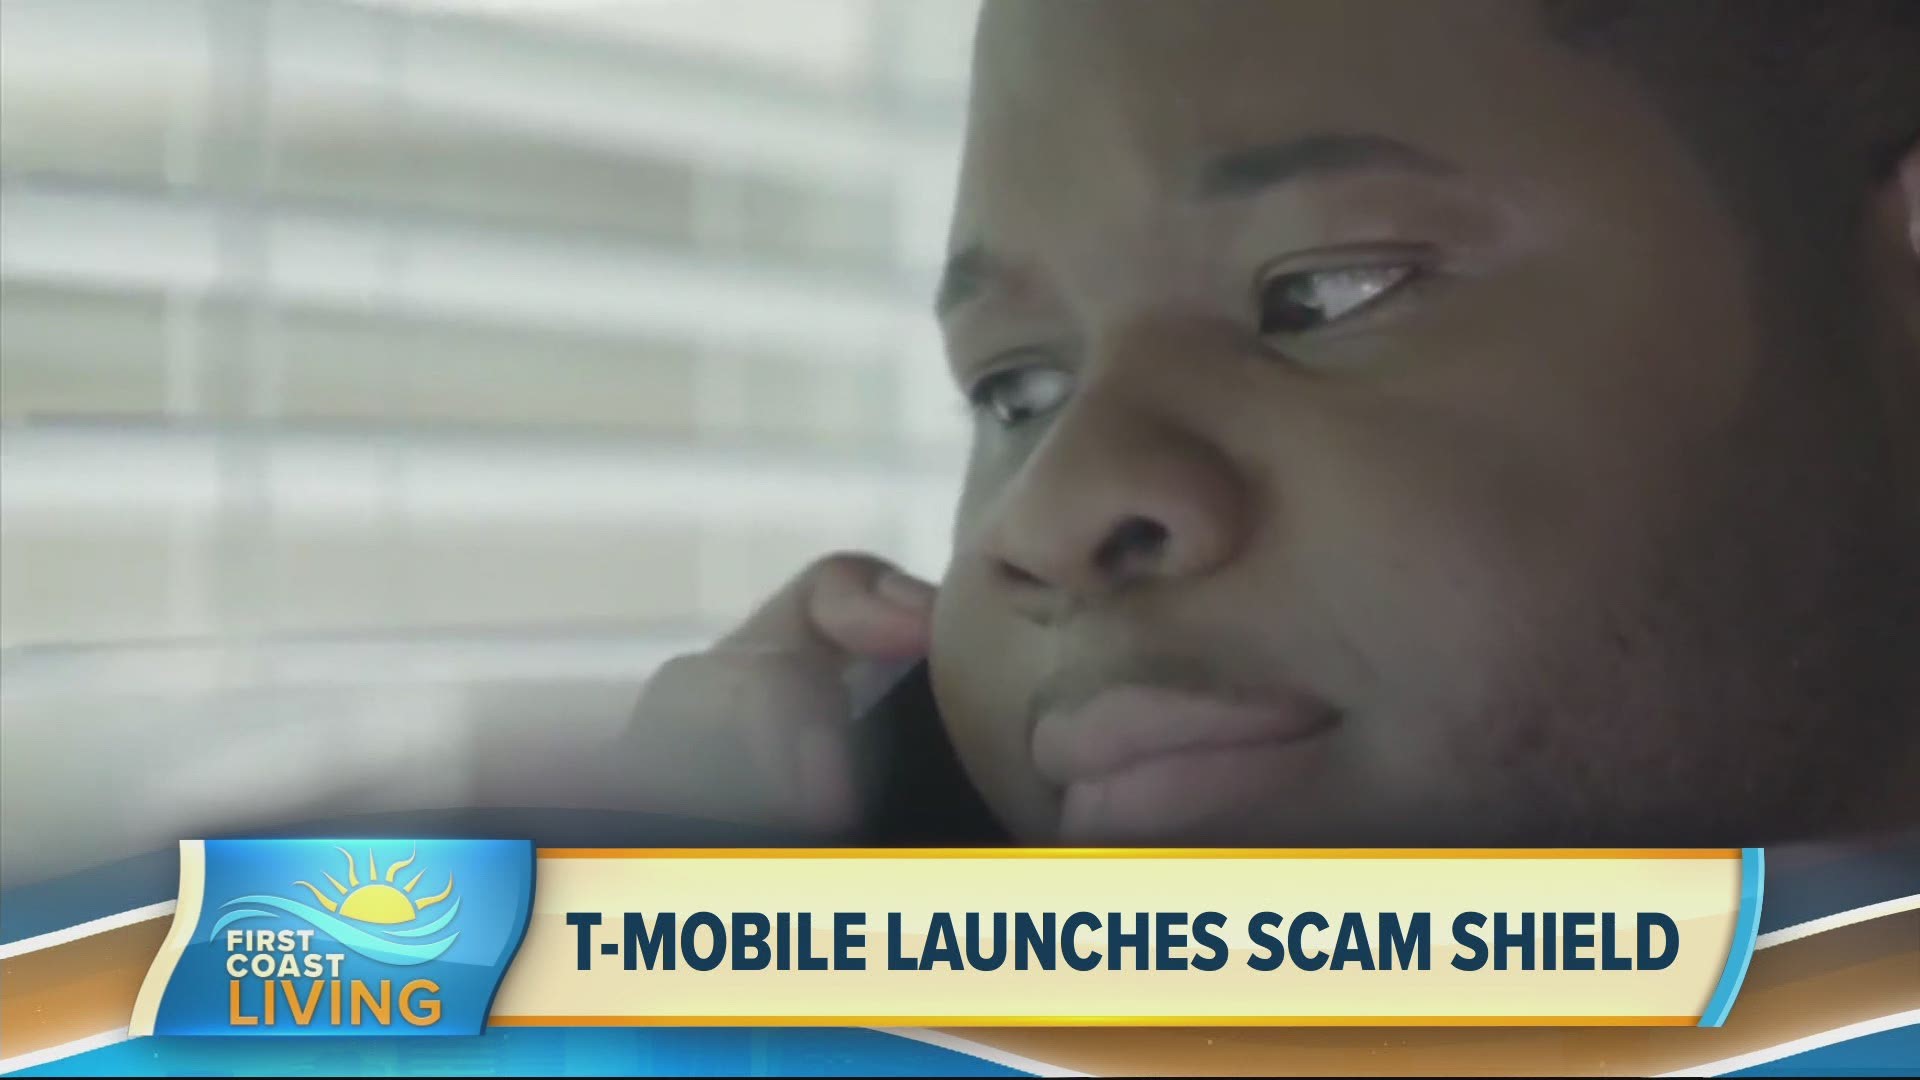 Learn how T-mobile is working to protect their customers from potential scammers.